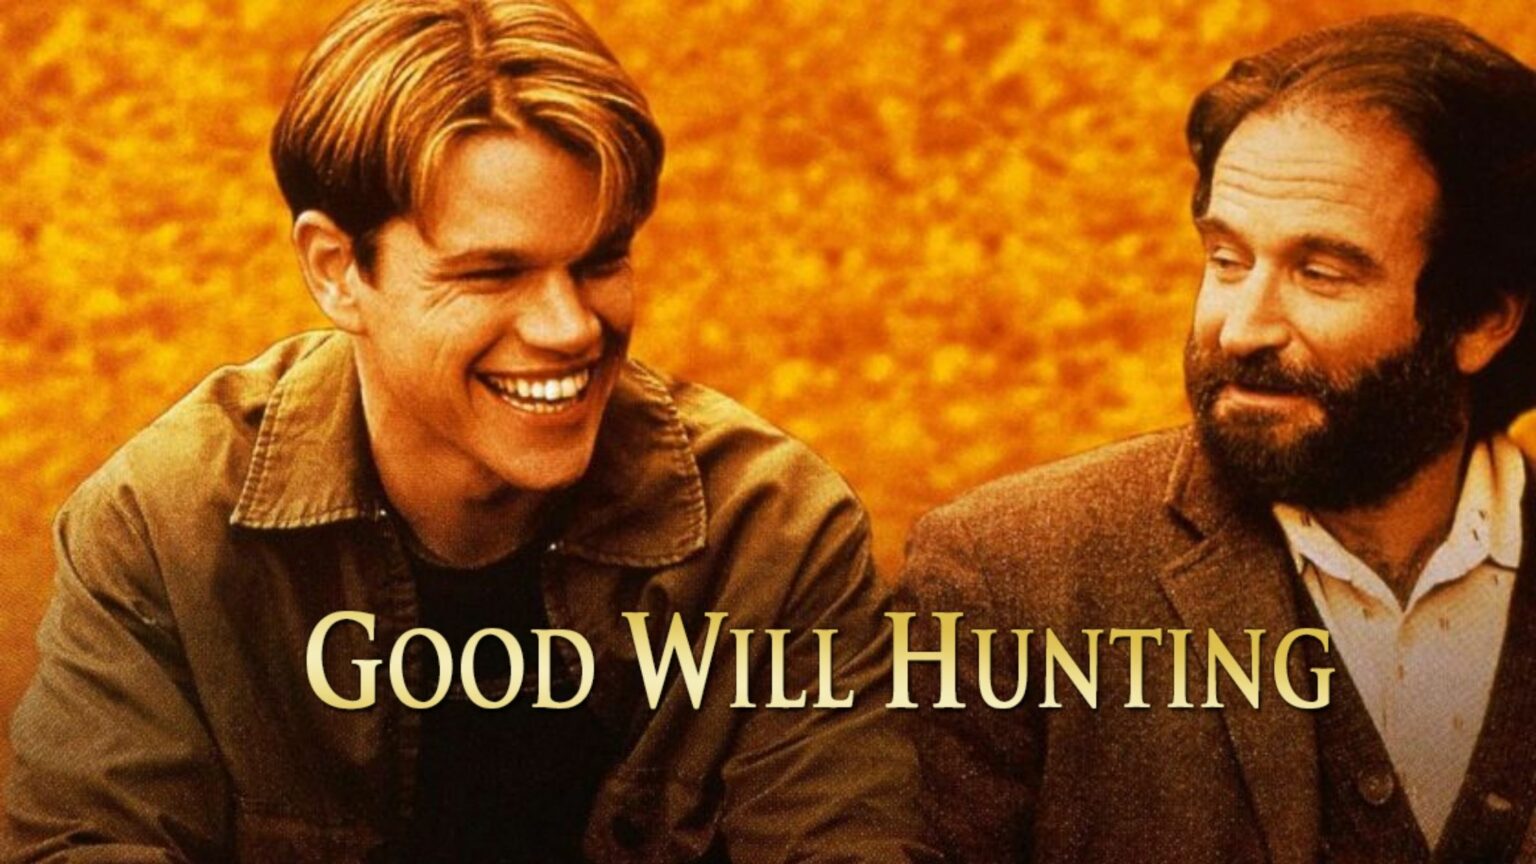 Good Will Hunting (1997): Watch it on Netflix From Anywhere in the World